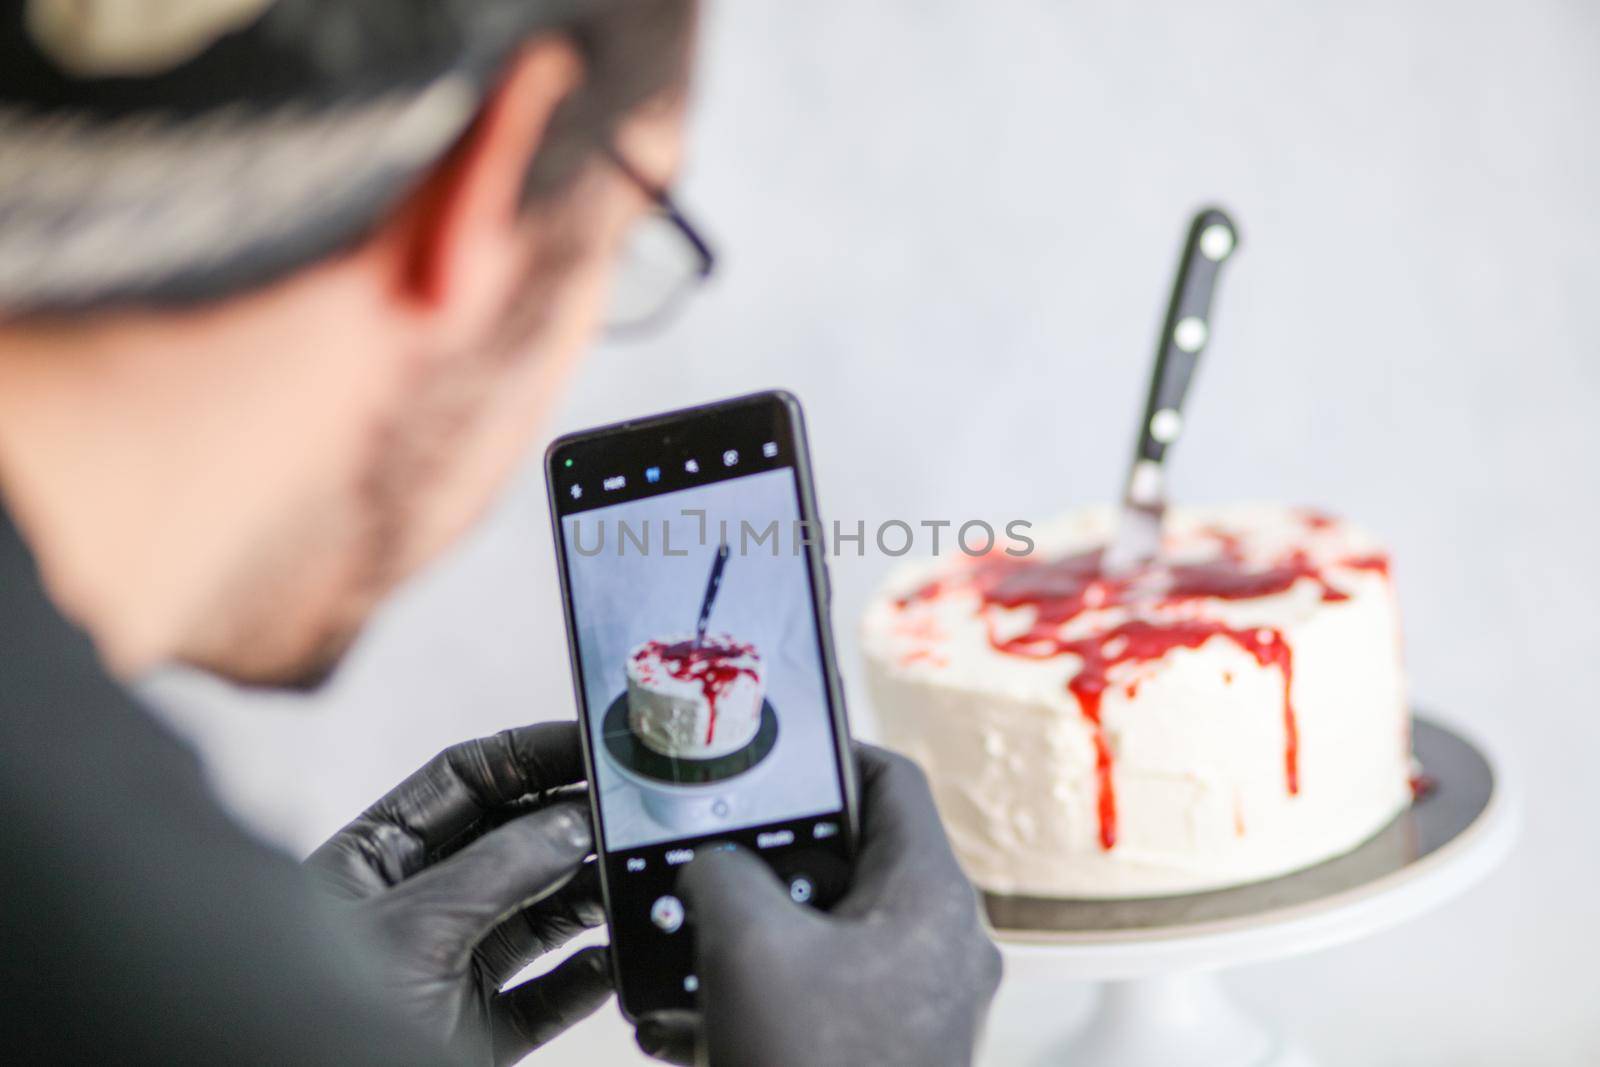 Photographing a bleeding monster cake with knife on cake stand